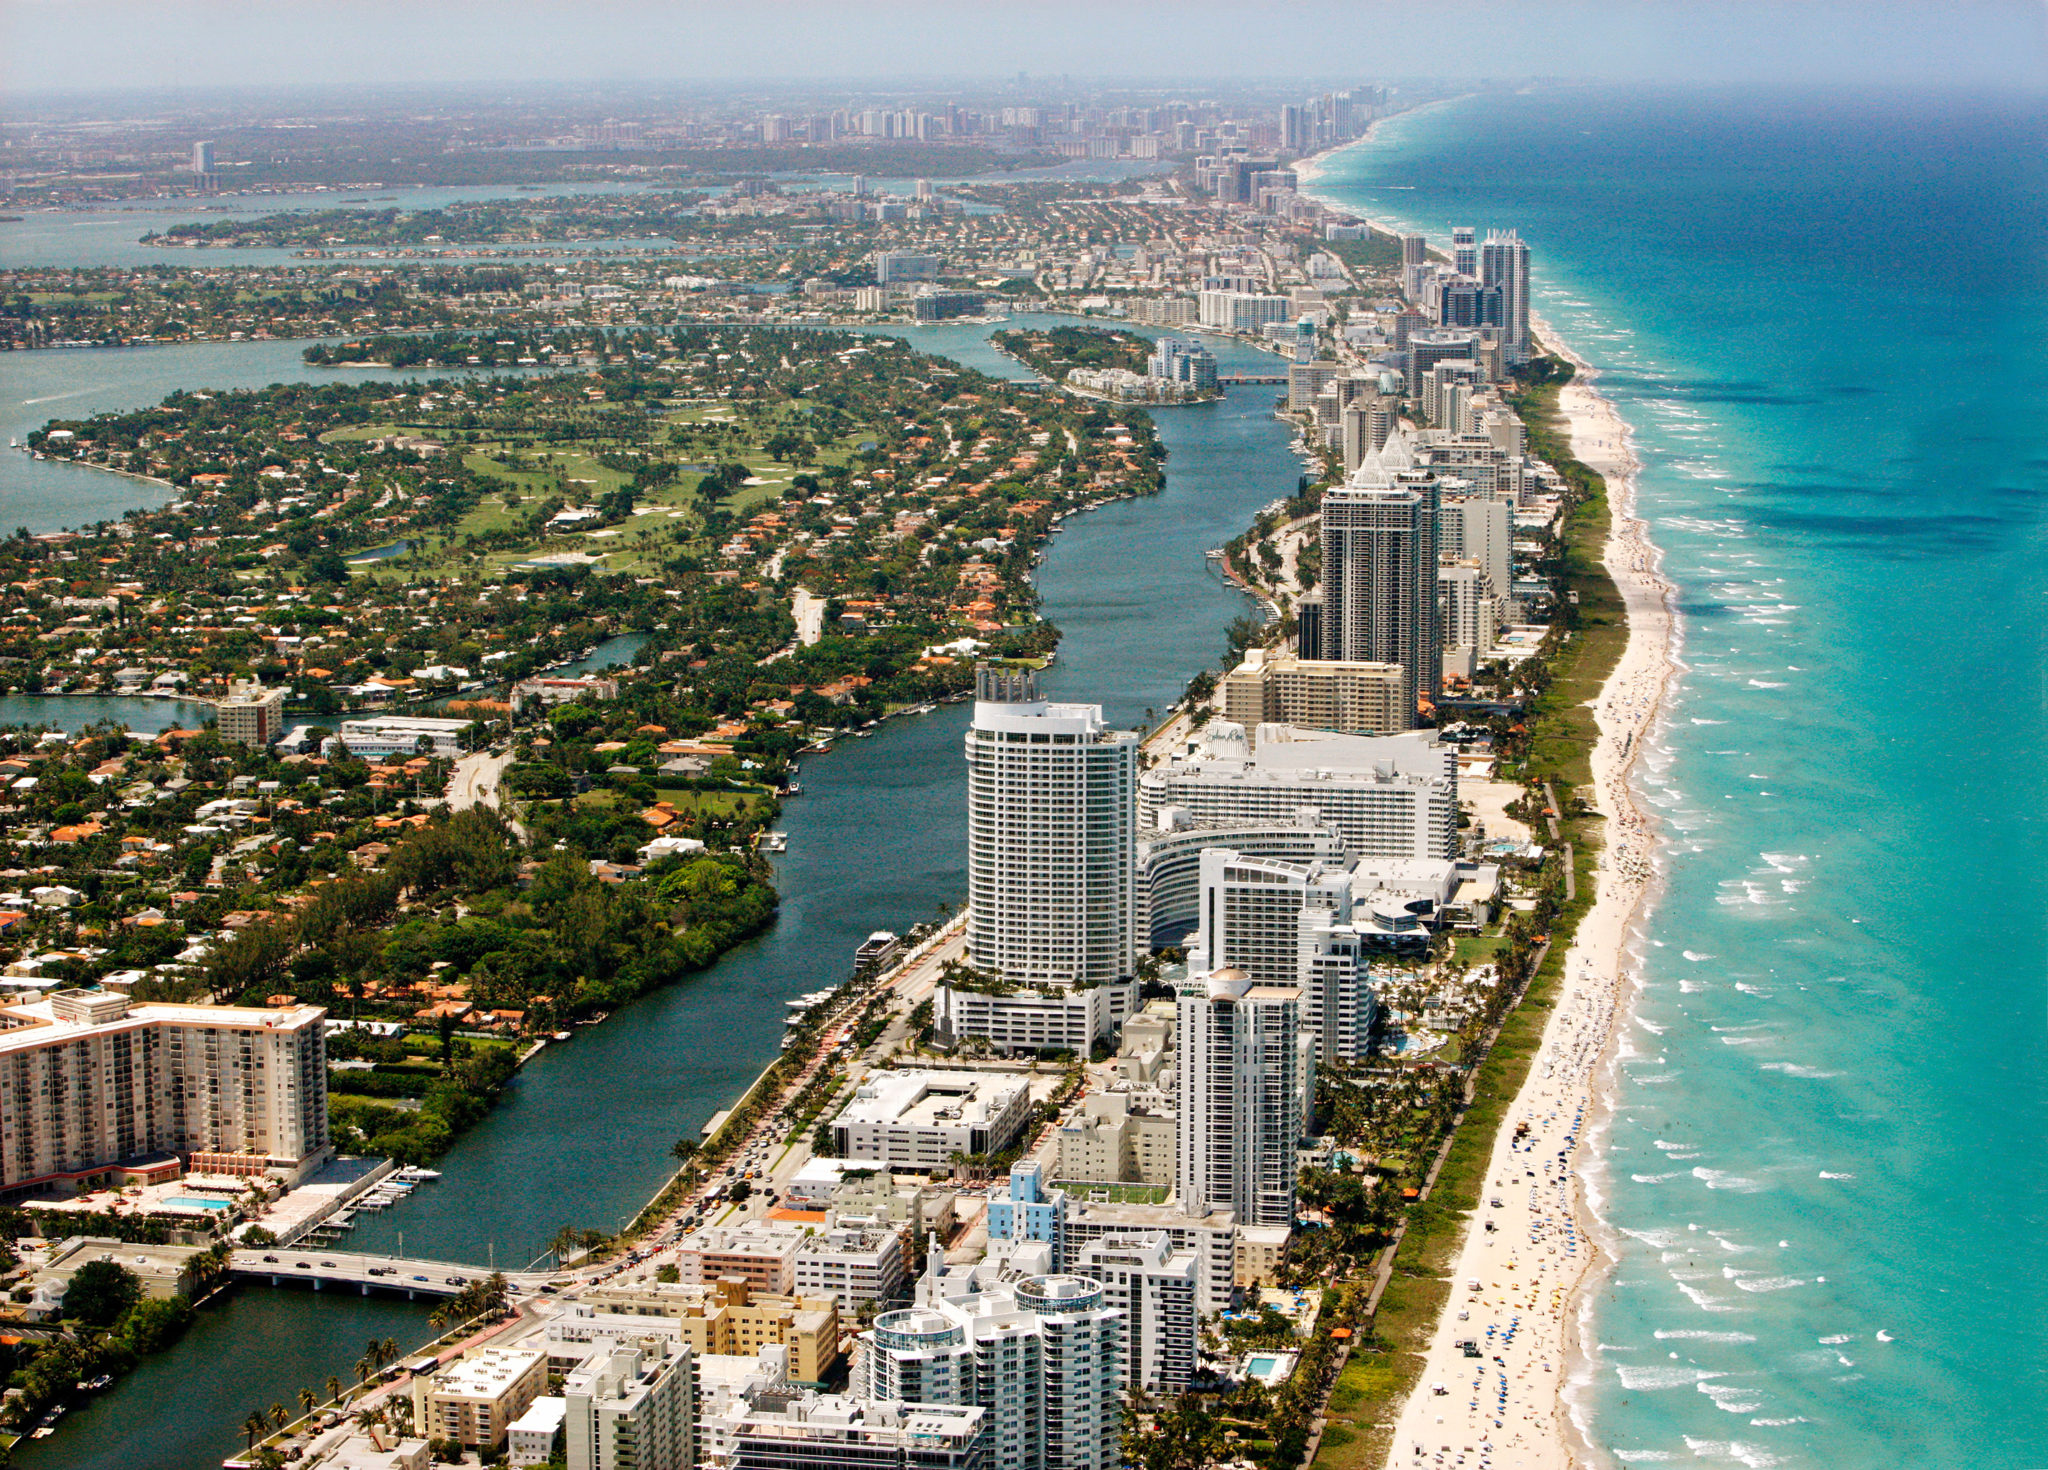 Foreign Investors Drawn to Luxury Real Estate in Miami